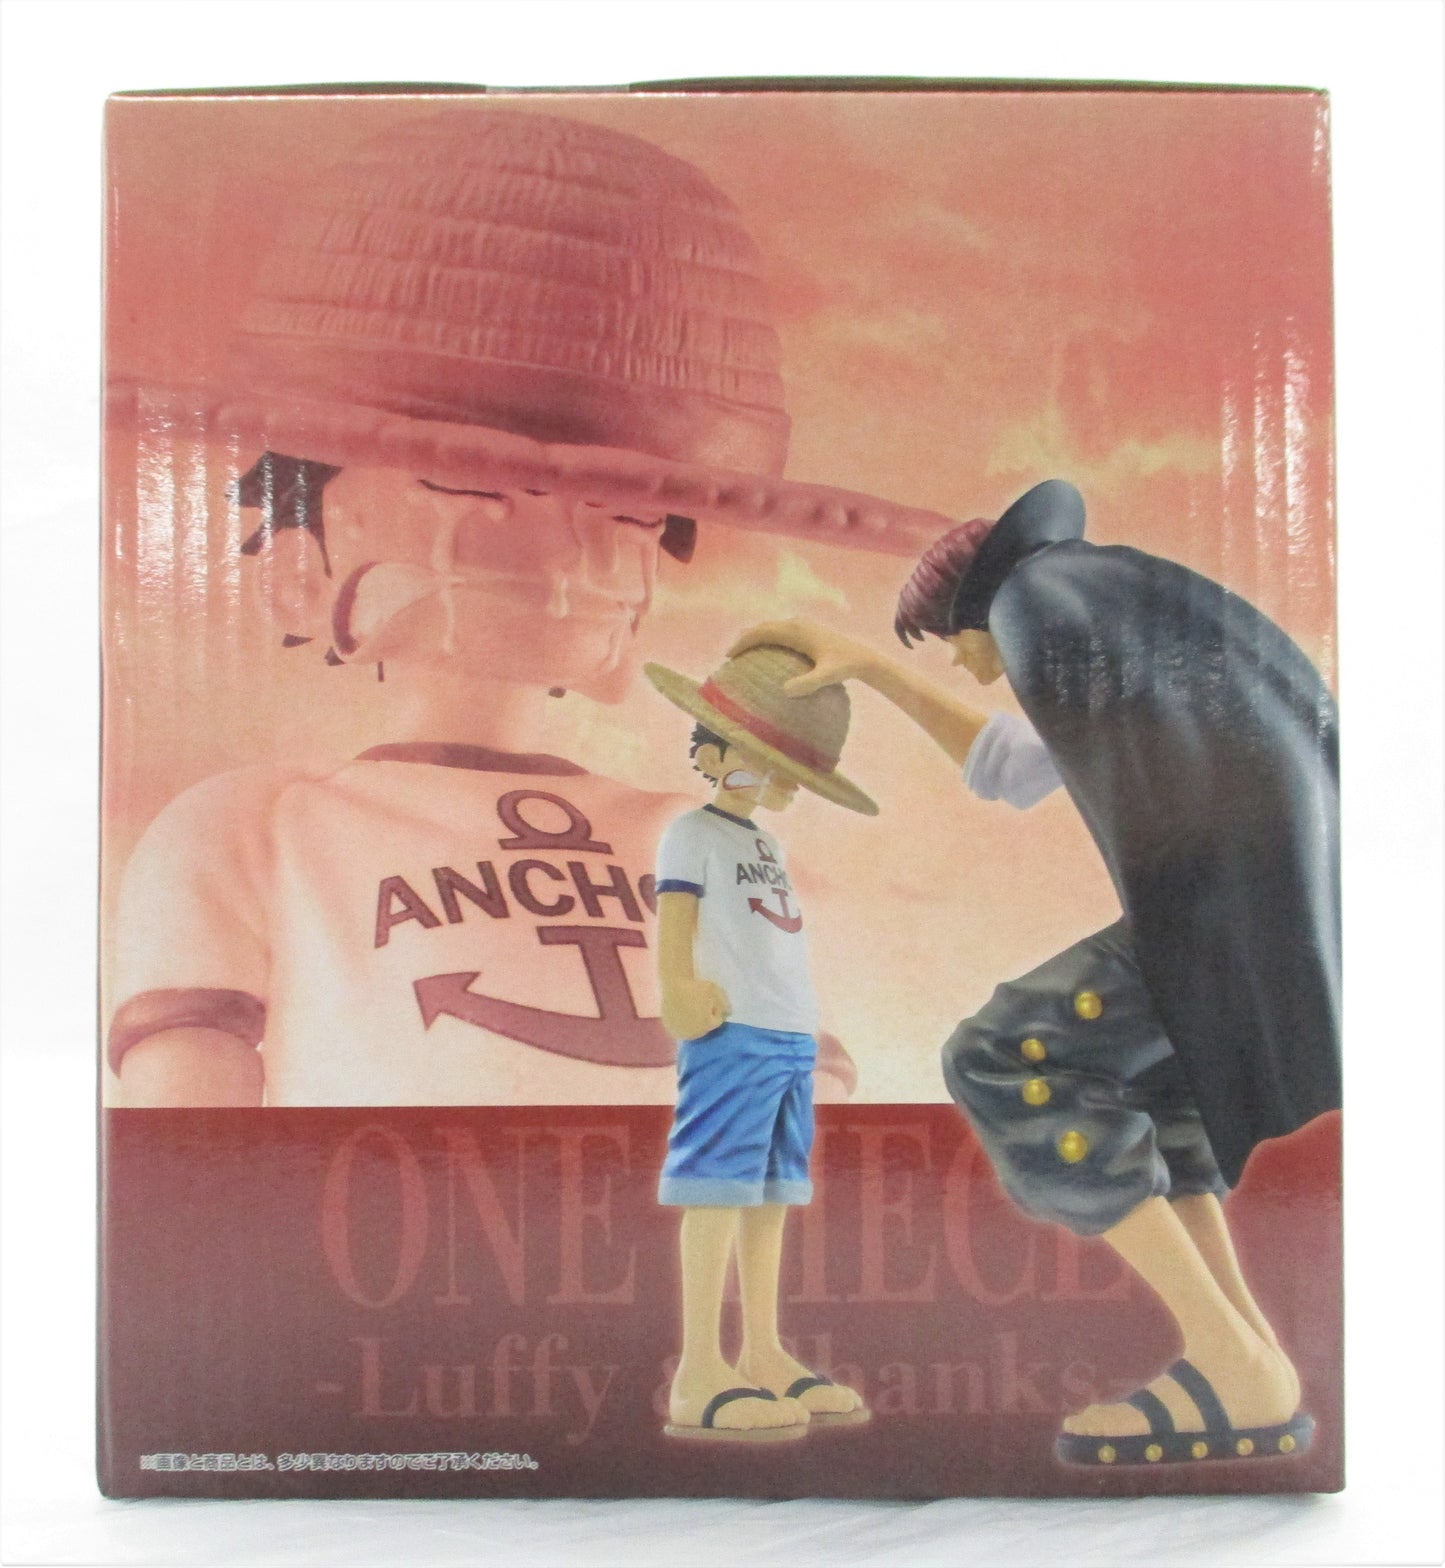 Ichiban Kuji One Piece Emotional Stories A Prize Revible Moment Luffy & Shanks